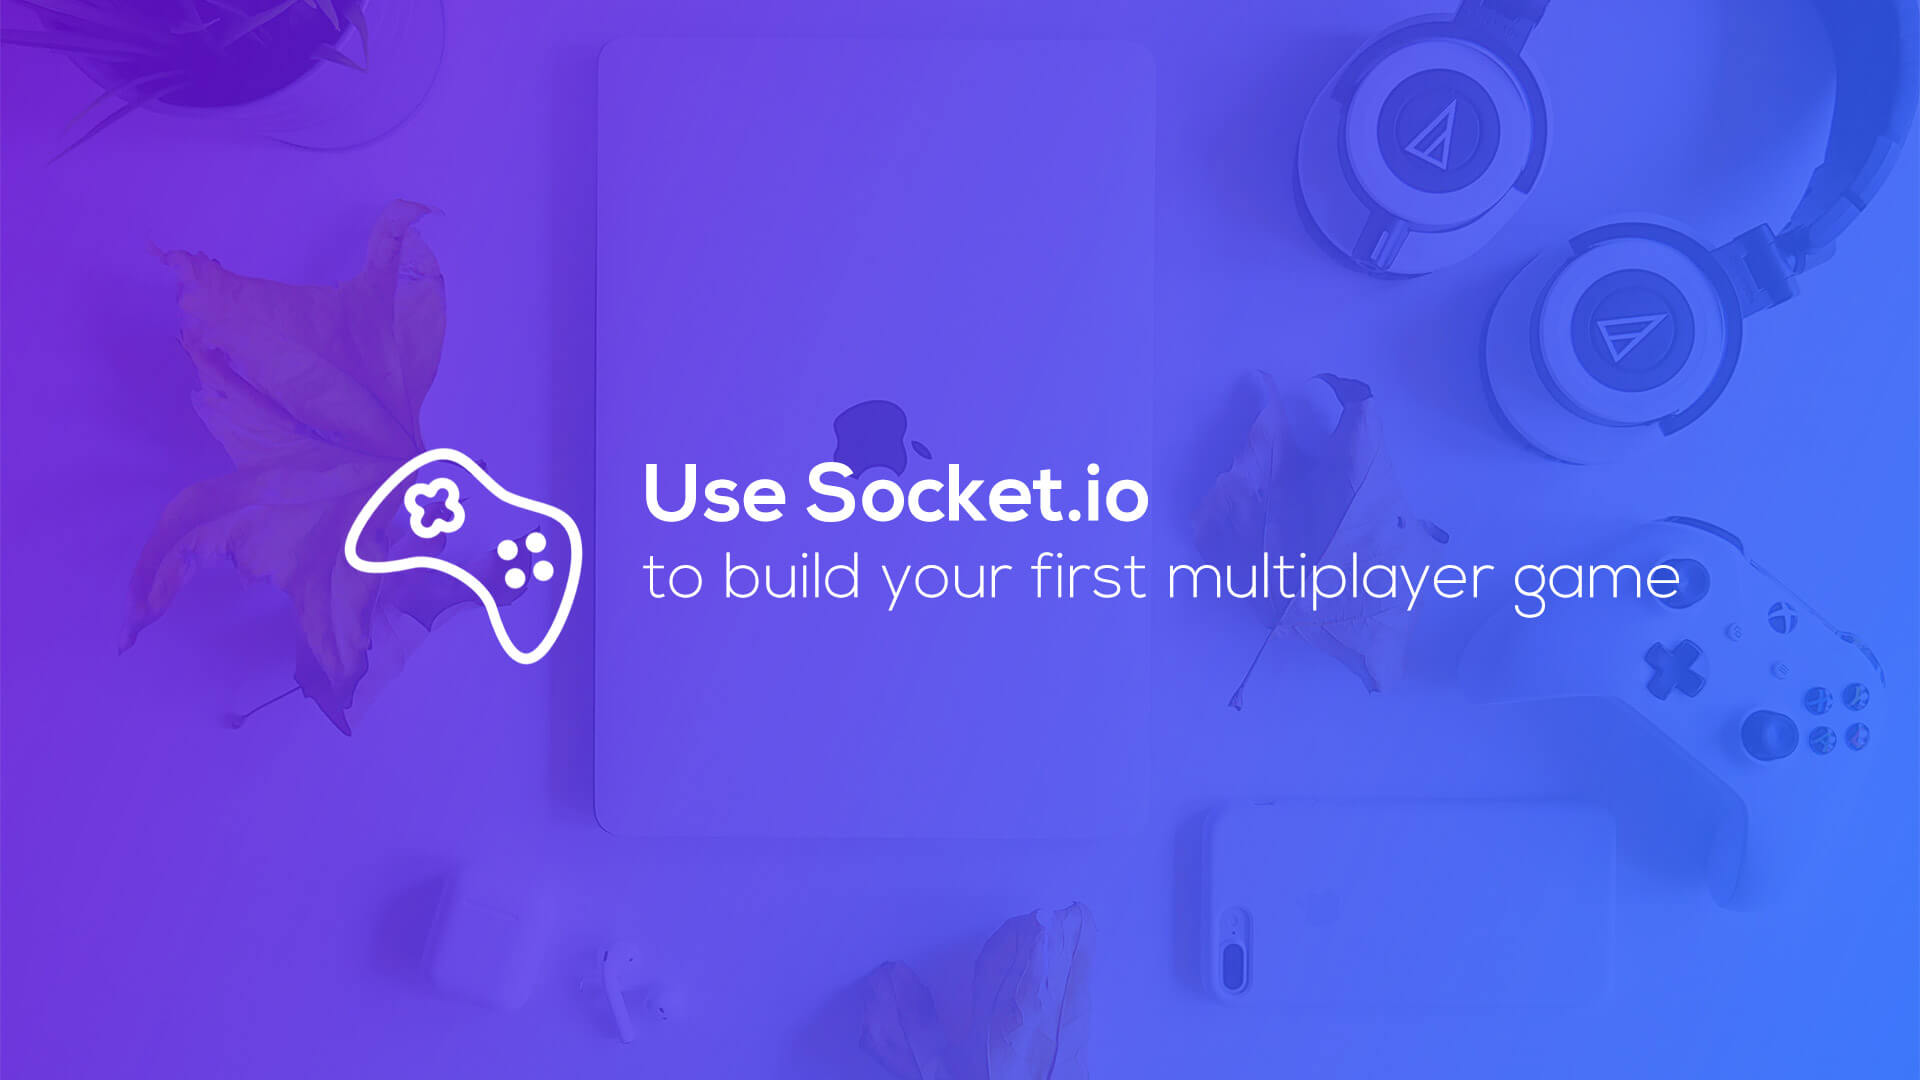 Use Socket.io to build your first multiplayer game!